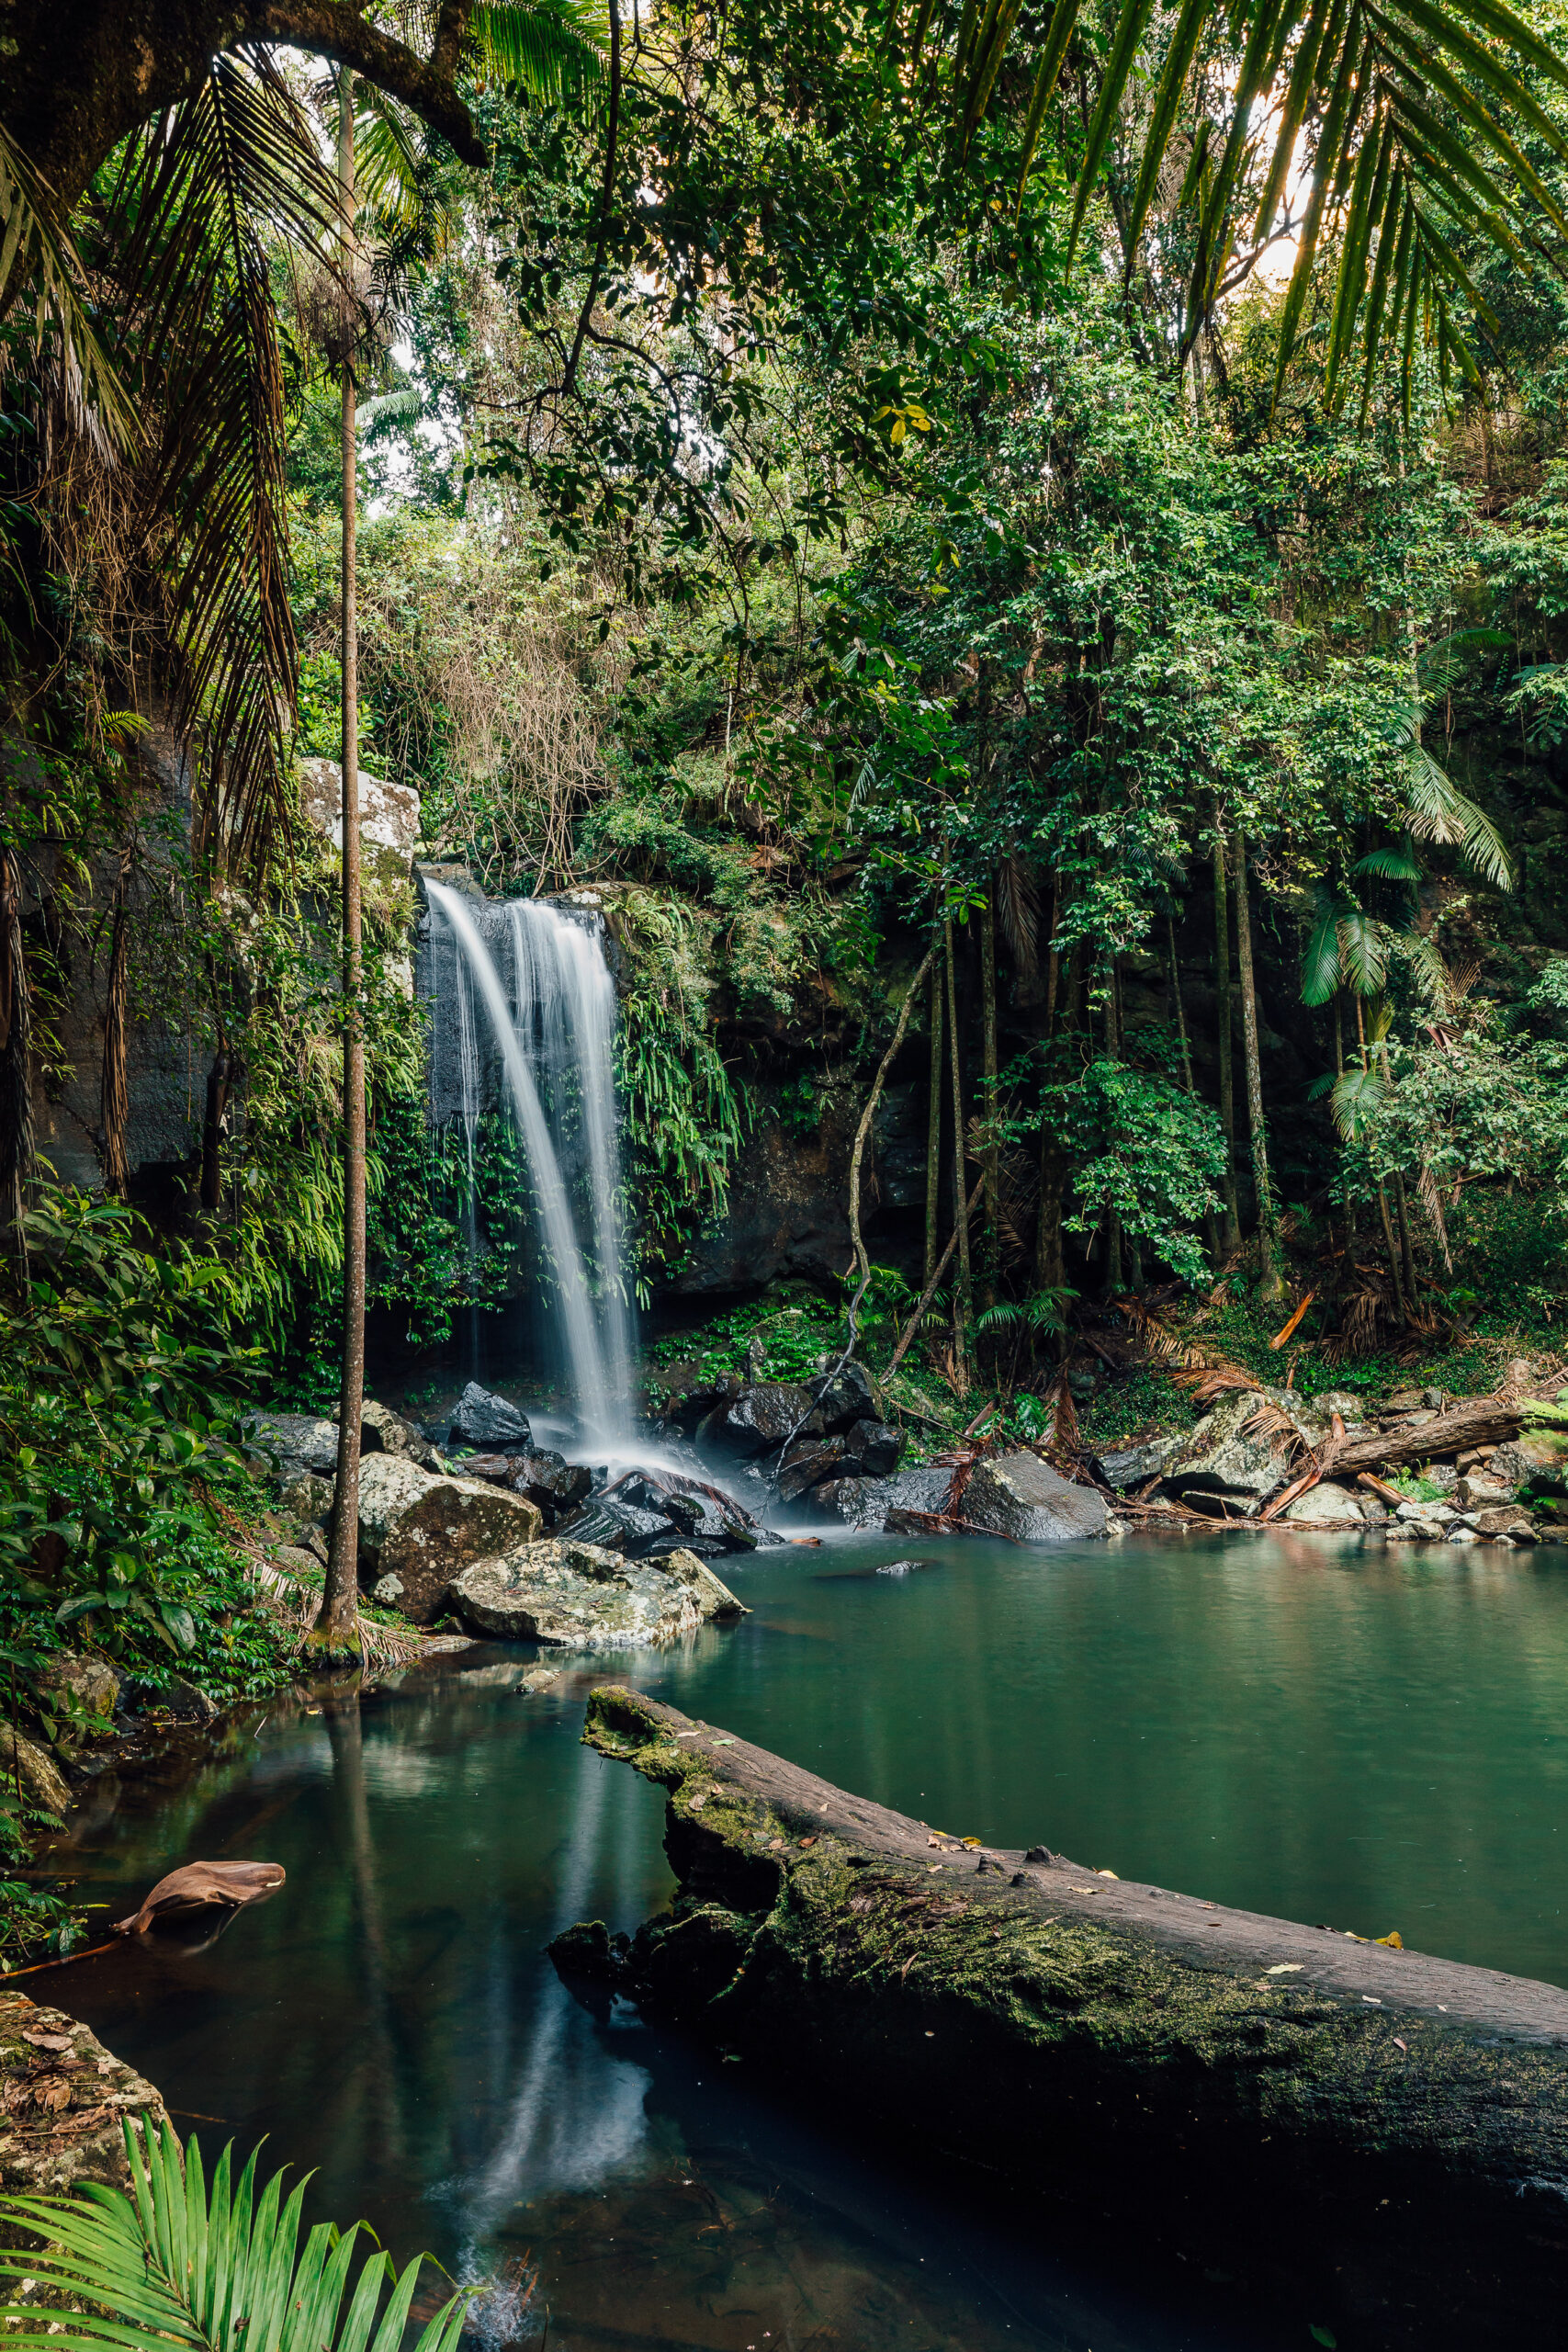 Curtis Falls at Tamborine Mountain (Photo Credit: Tourism and Events Queensland)